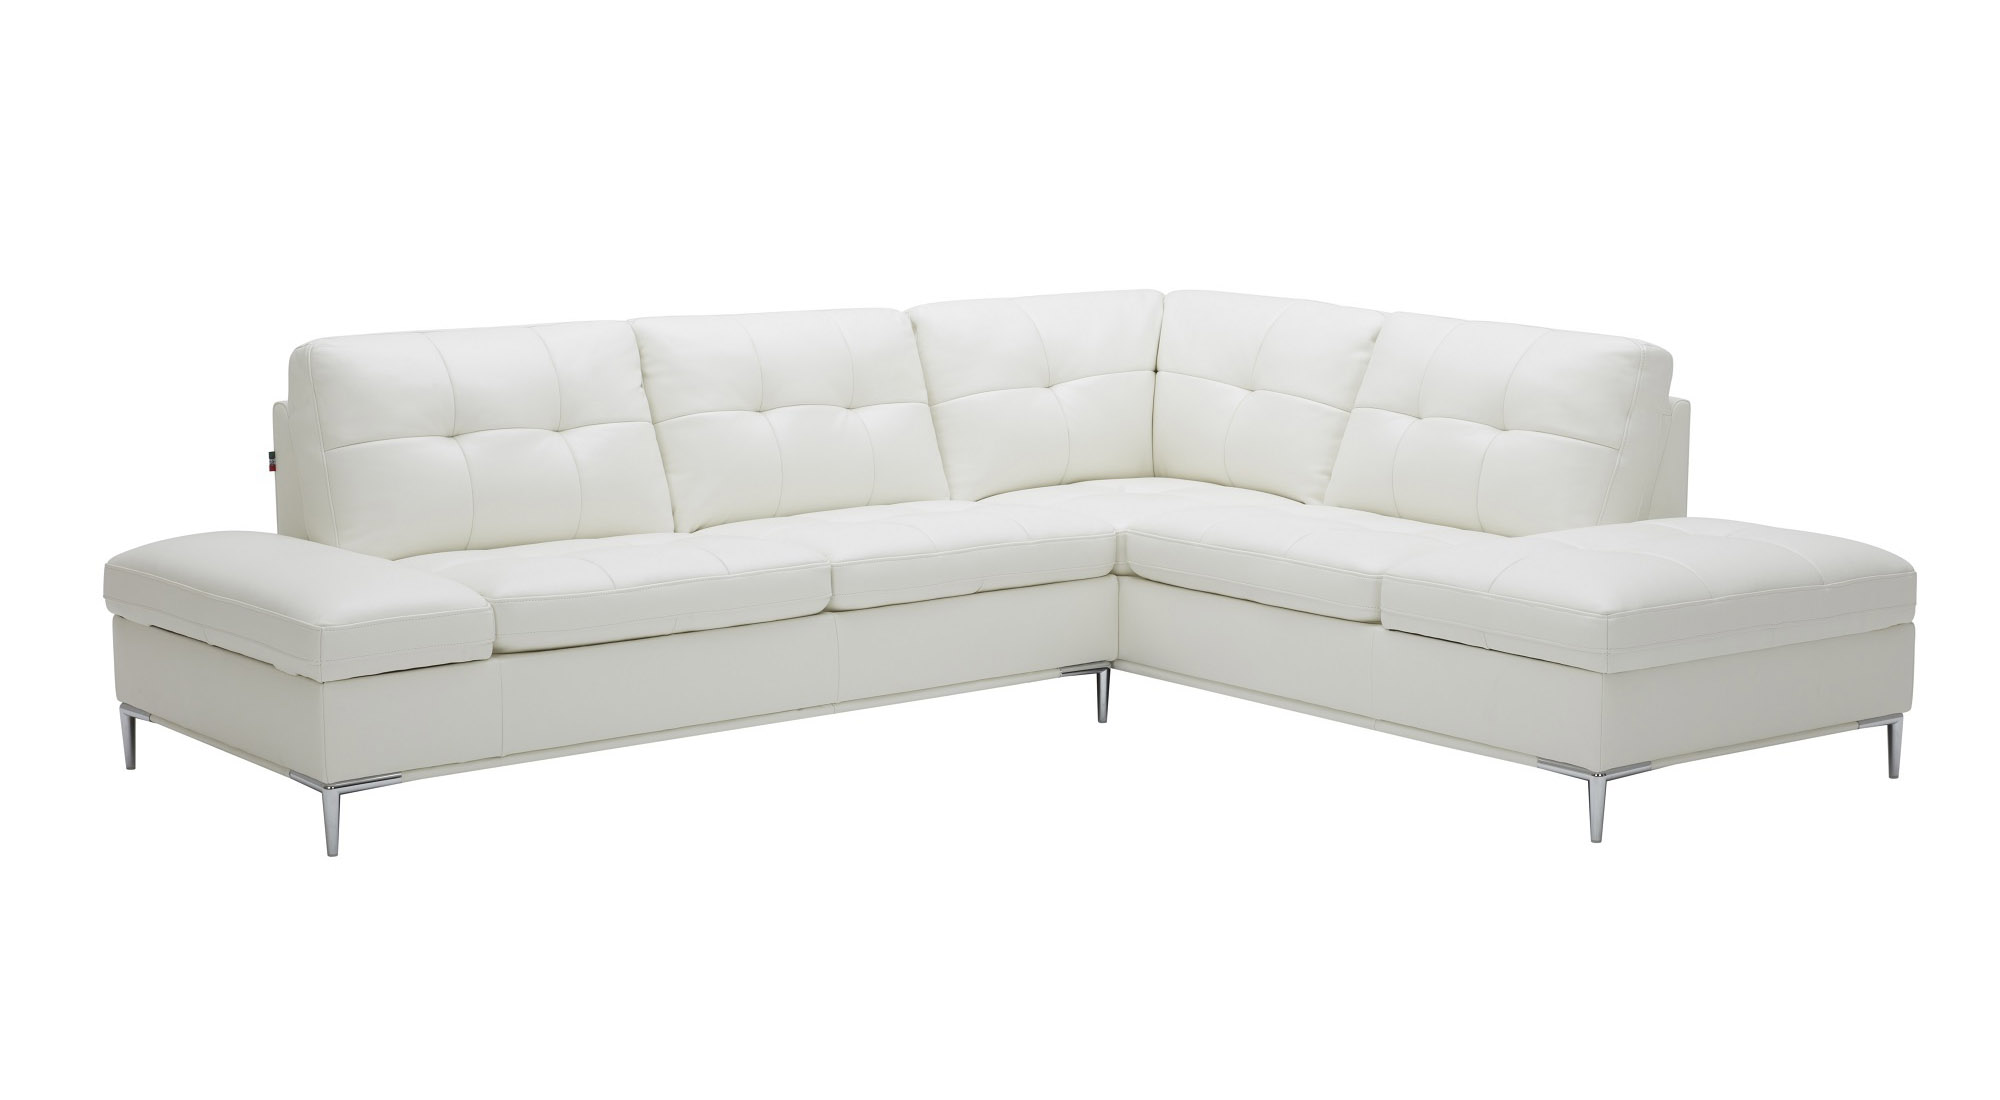 Elite Furniture Italian Leather Upholstery with Pillows - Click Image to Close